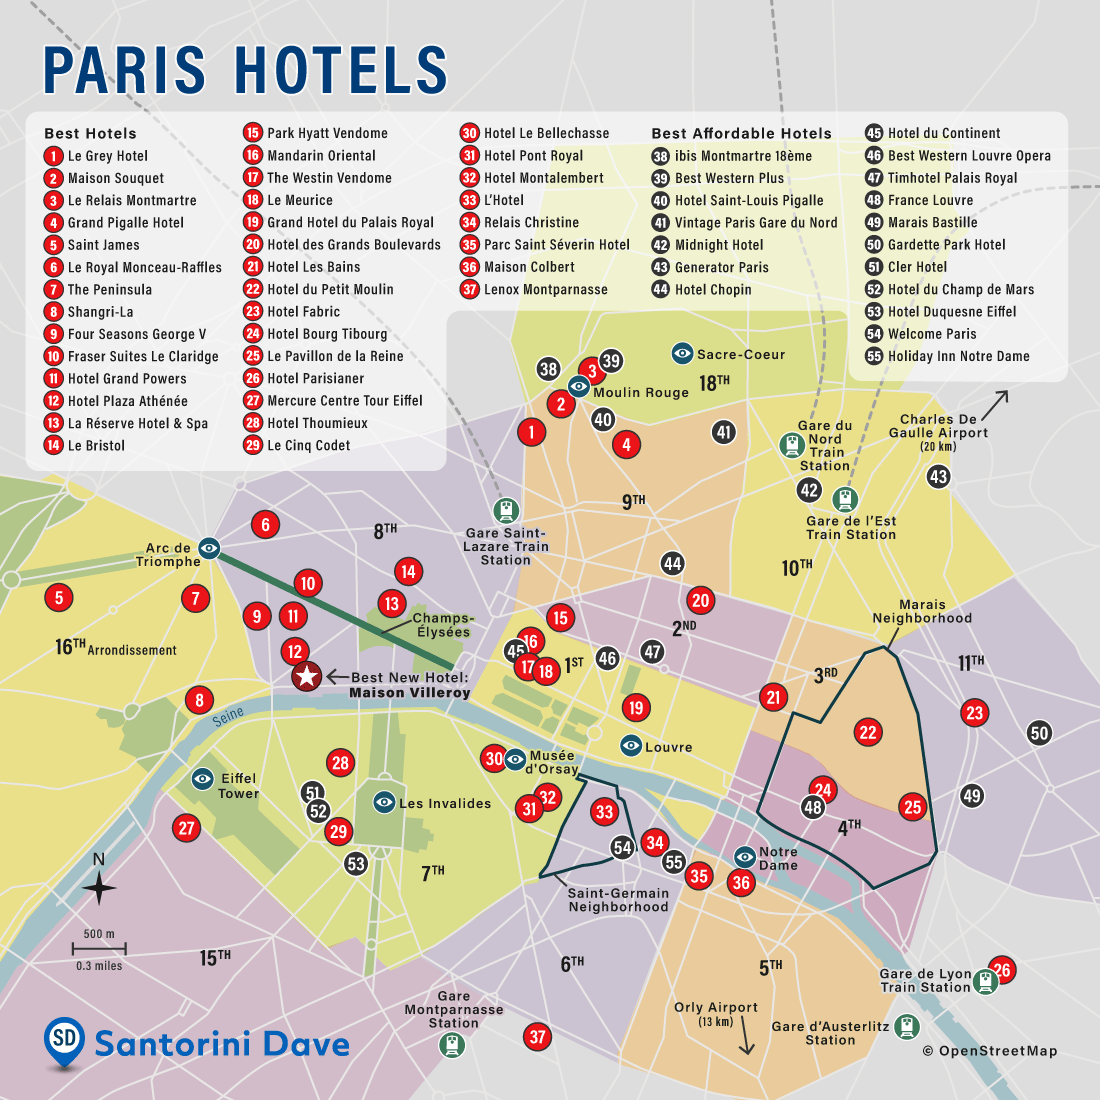 Map of luxury, affordable, and best new hotels in Paris